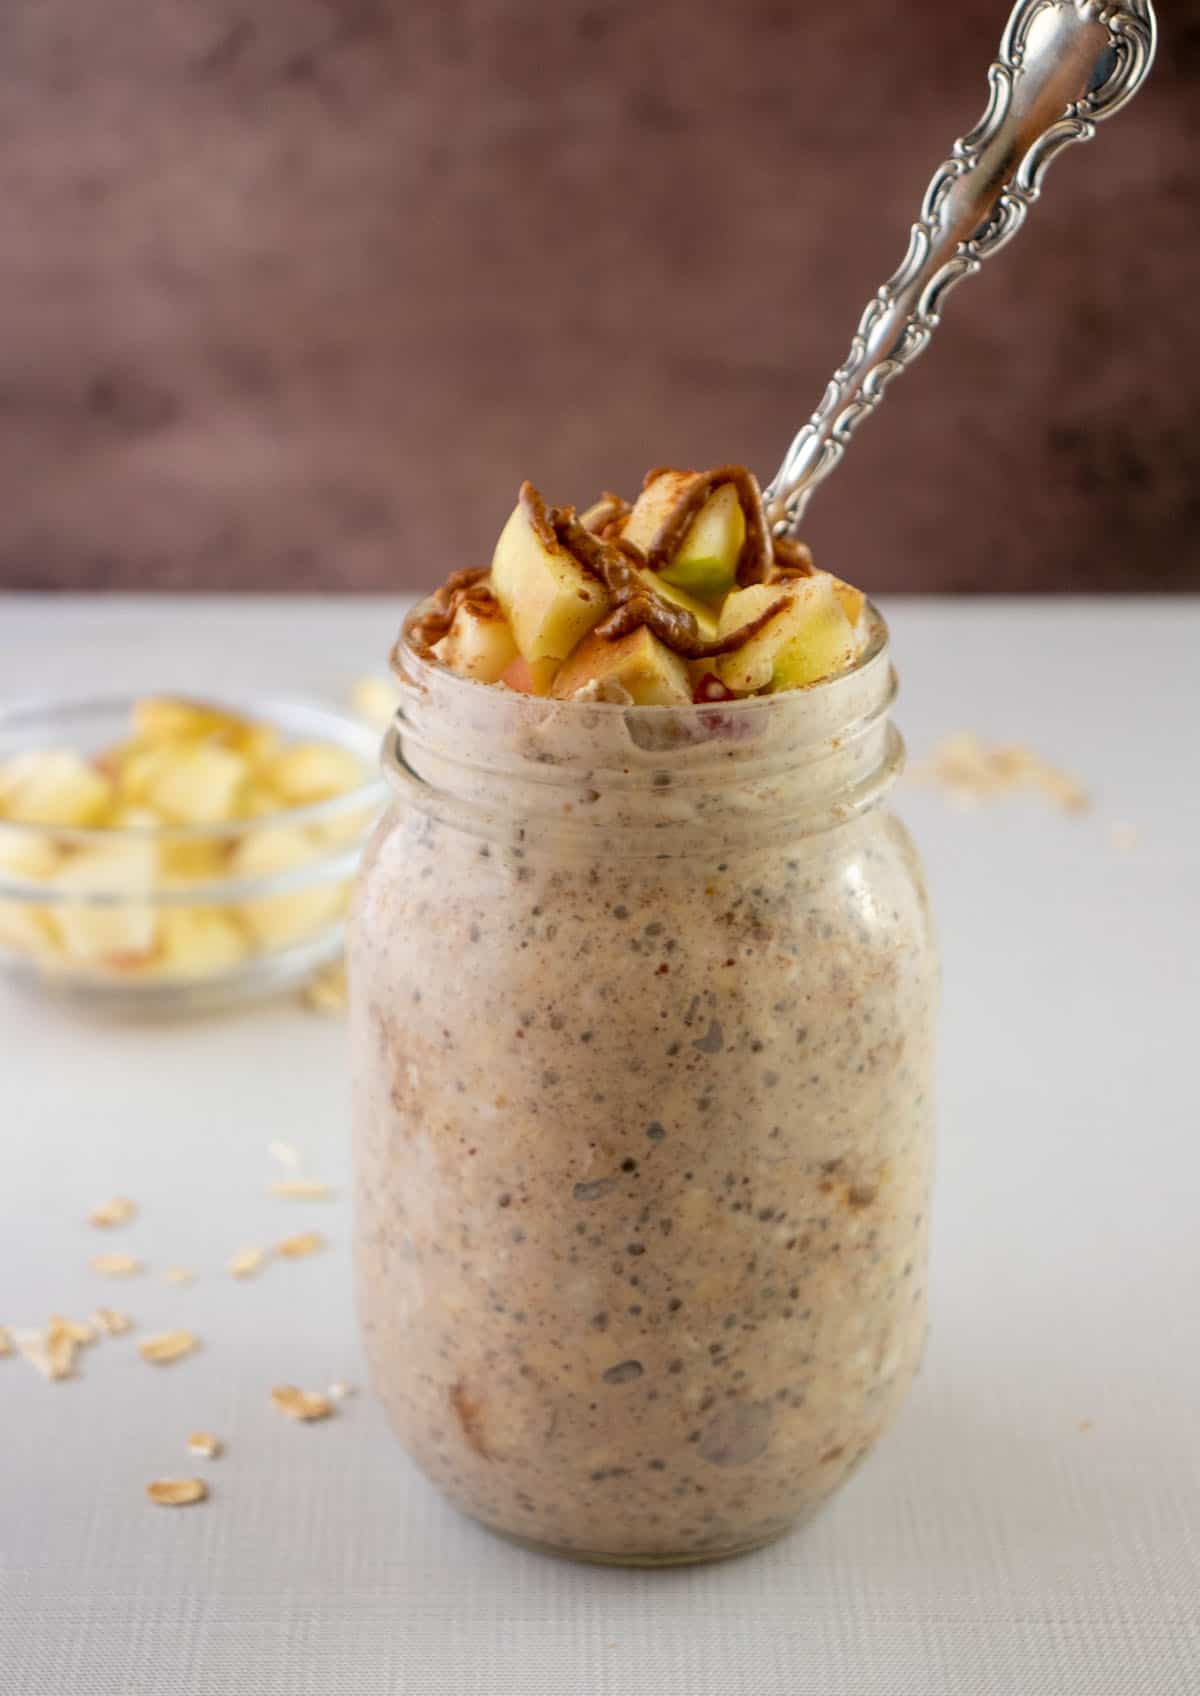 apple cinnamon overnight oats in a glass mason jar with a silver spoon topped with apples, cinnamon and almond butter. A bowl of chopped apples in the background. And oats laying next to the jar.